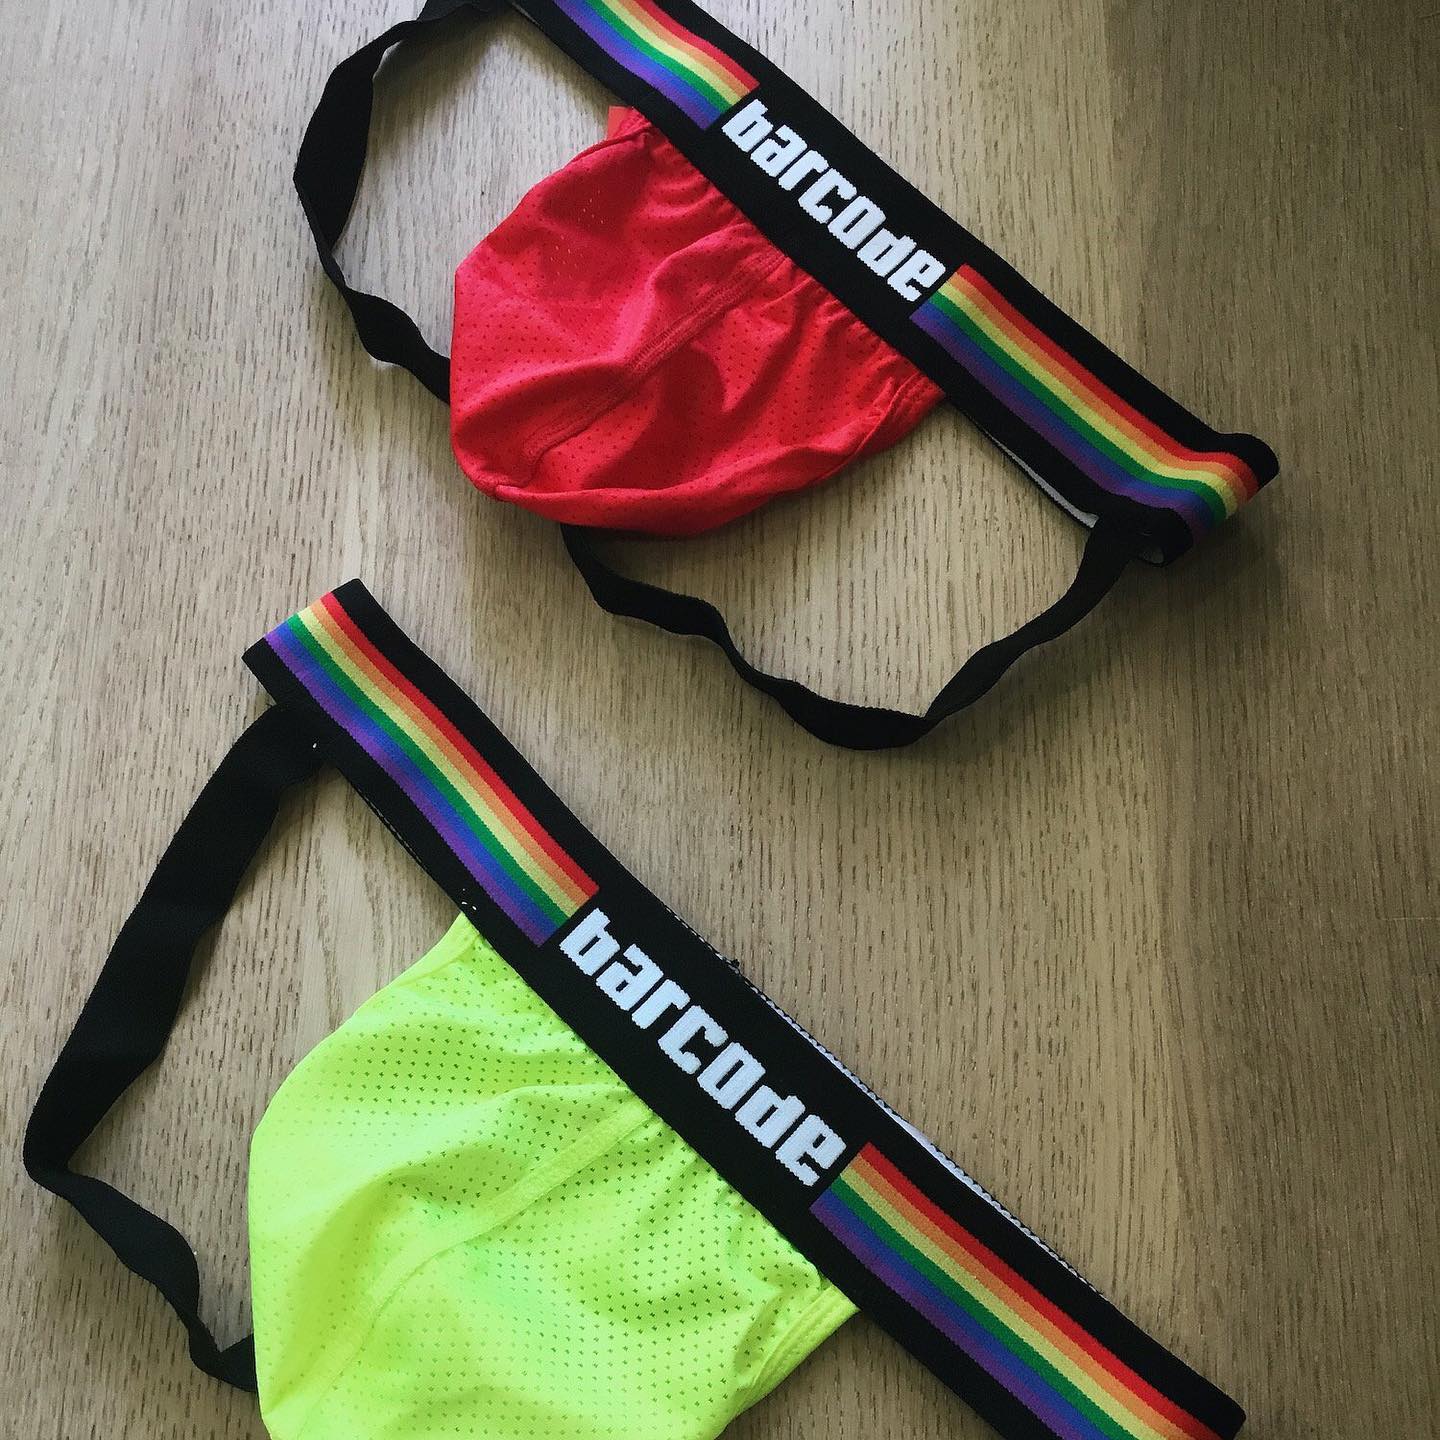 The fun and sexy Pride Jockstraps of Barcode Berlin are perfect for everyday wear, made from an athletic mesh that will keep you cool for longer. Available in 7 beautiful colours:
____
https://menandunderwear.com/shop/manufacturer/barcode-berlin